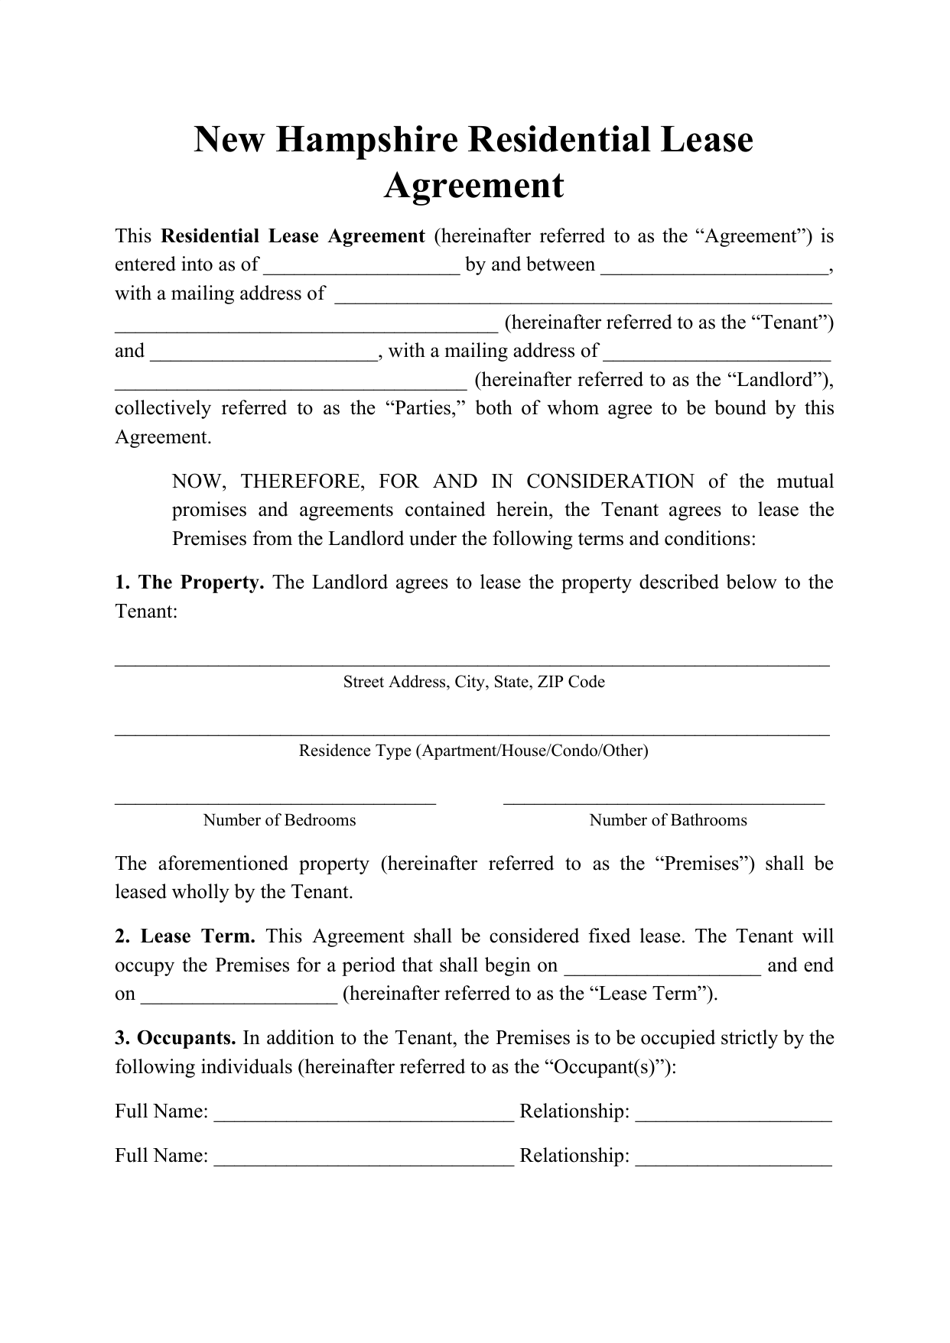 Residential Lease Agreement Template - New Hampshire, Page 1